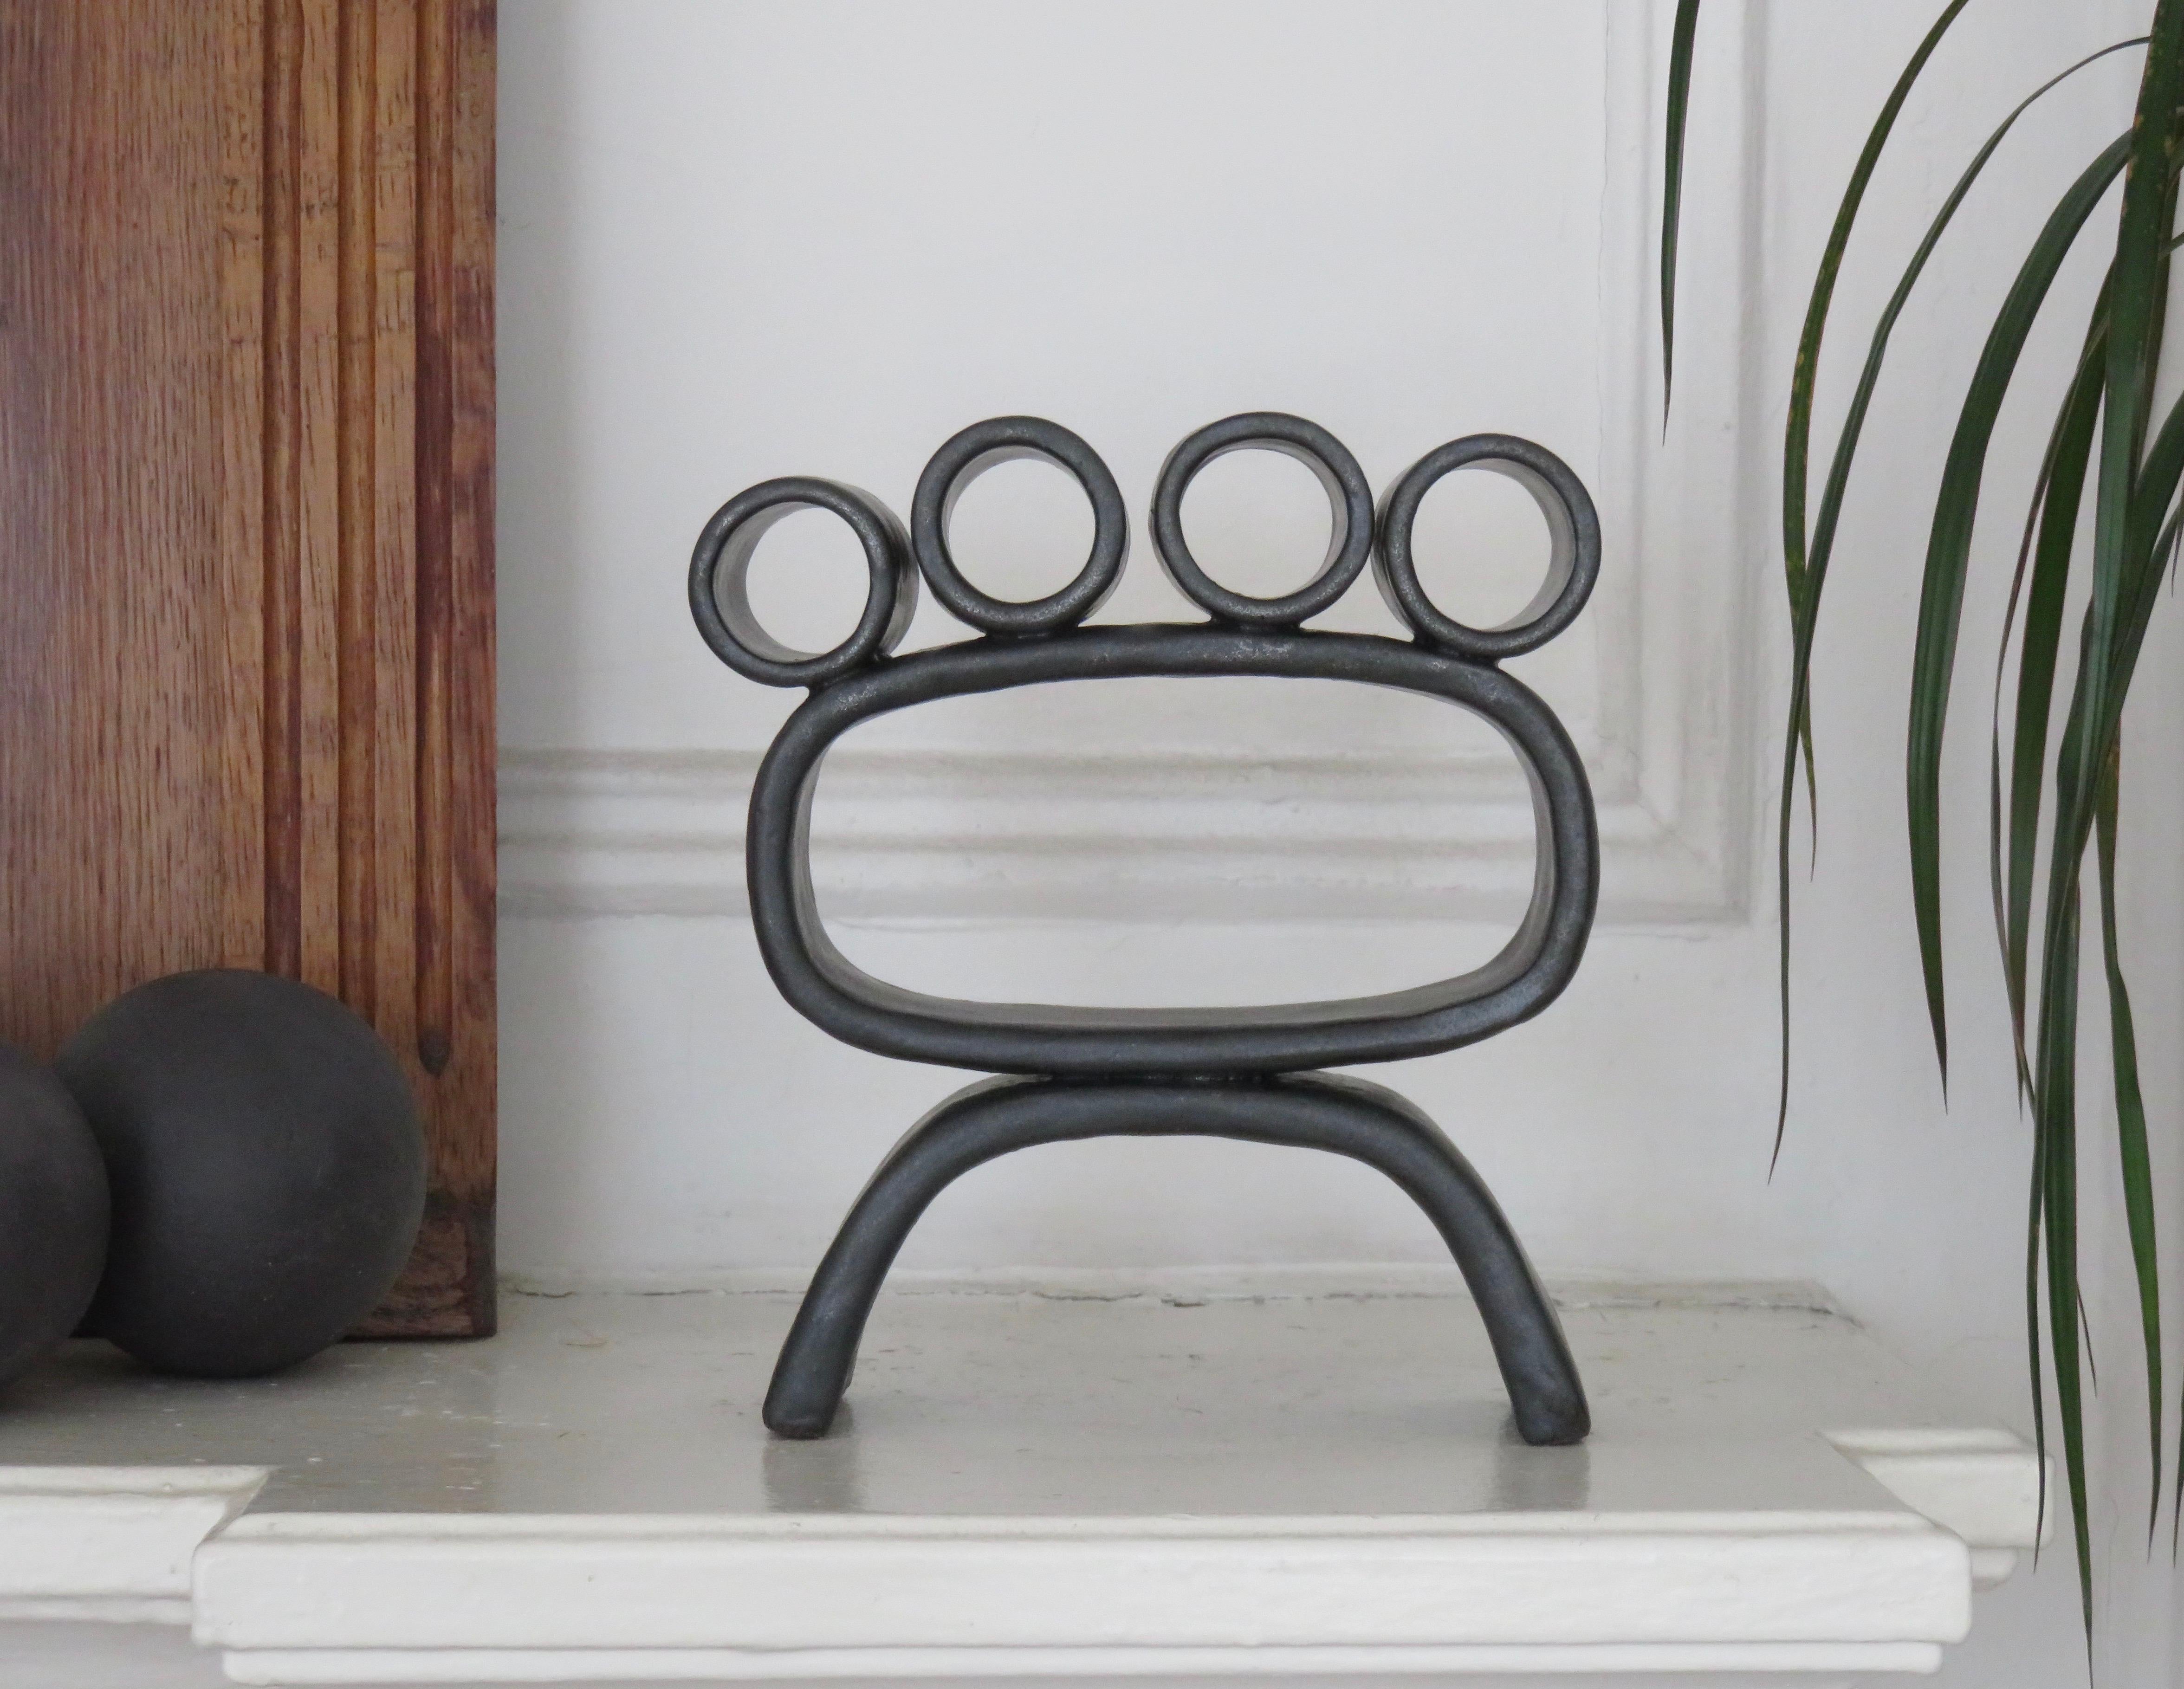 Metallic Black Hand-Built Ceramic Sculpture with Small Rings on Legs 6